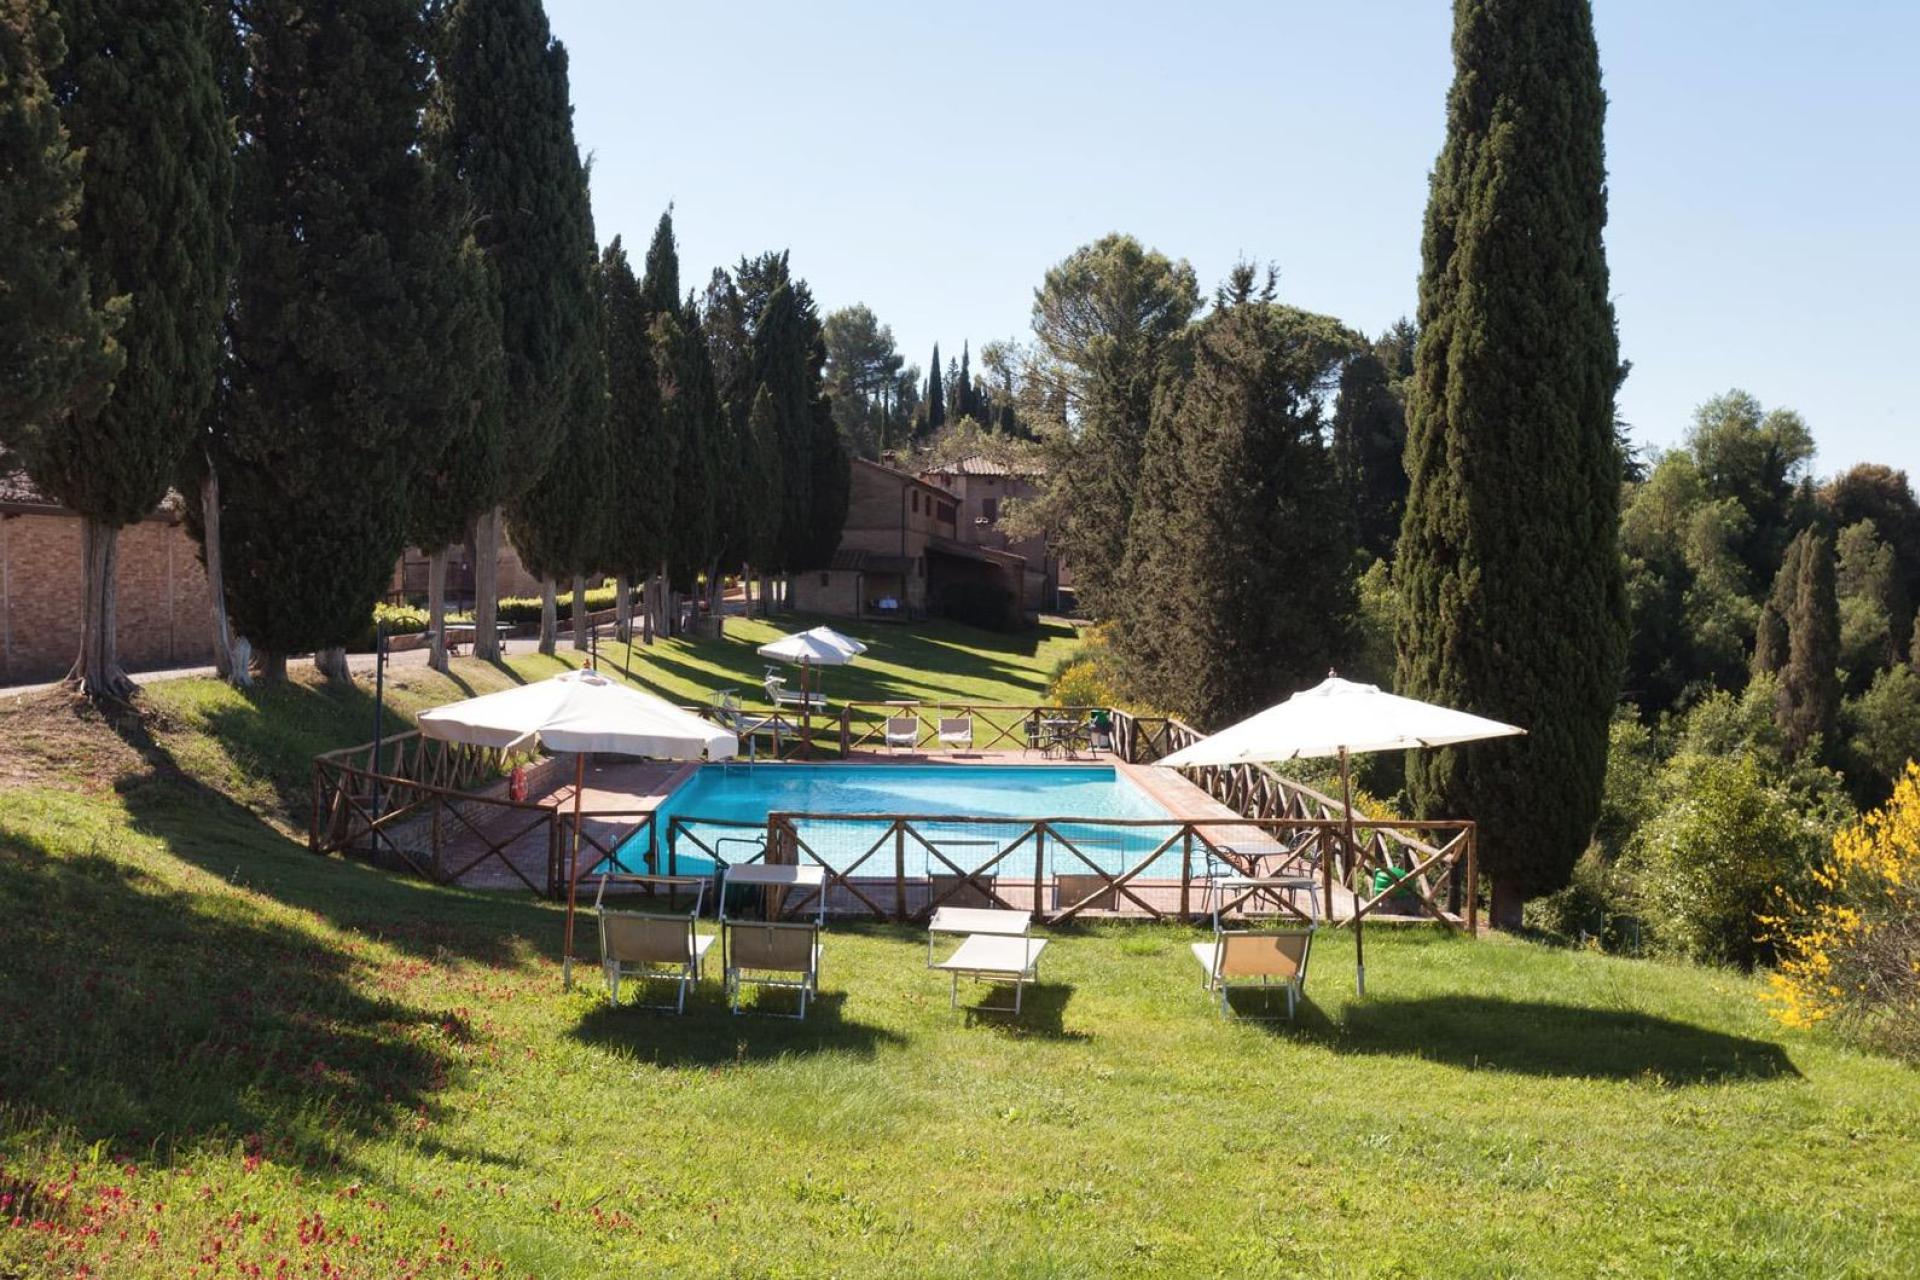 1. Highly recommended agriturismo near Siena